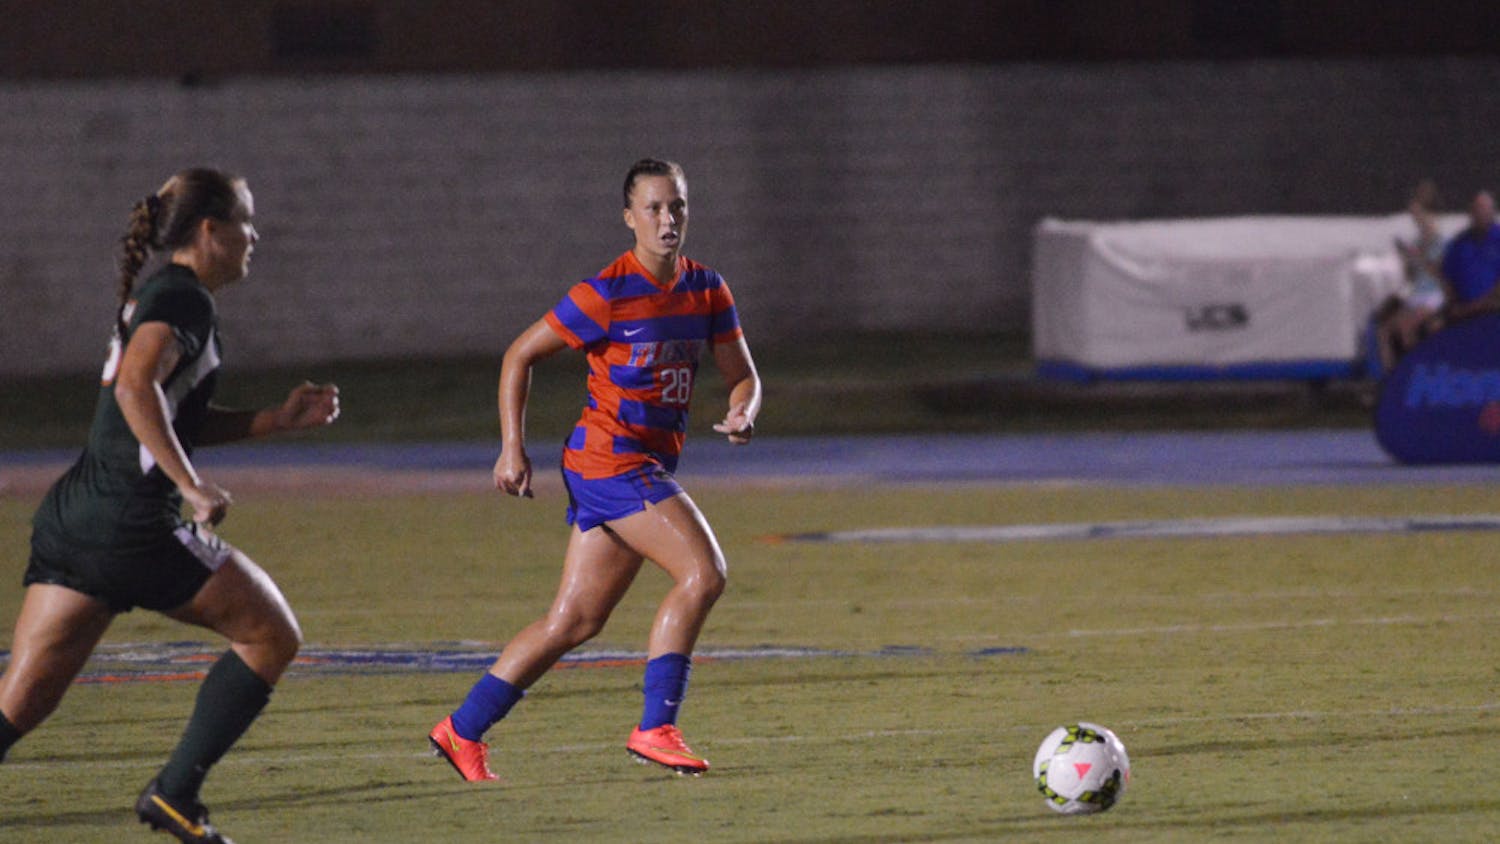 Sophomore midfielder Meggie Dougherty Howard runs toward the ball during Florida's 3-0 win against Miami on August 22, 2014, at James G. Pressly Stadium.